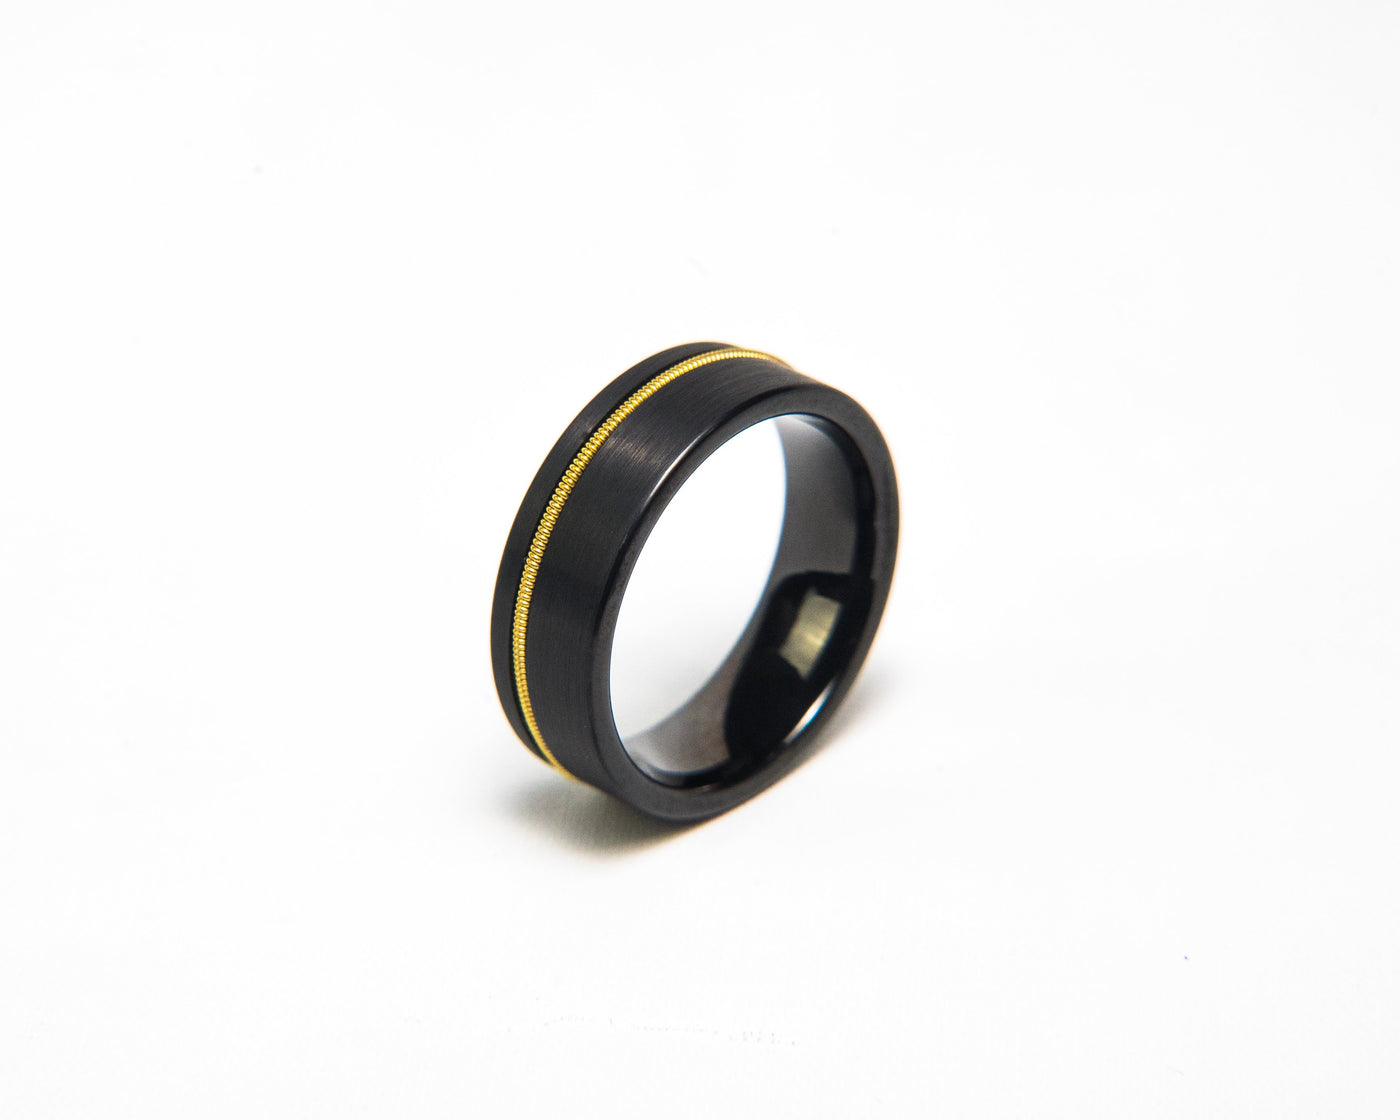 The “Mayer” Ring by Vintage Gentlemen